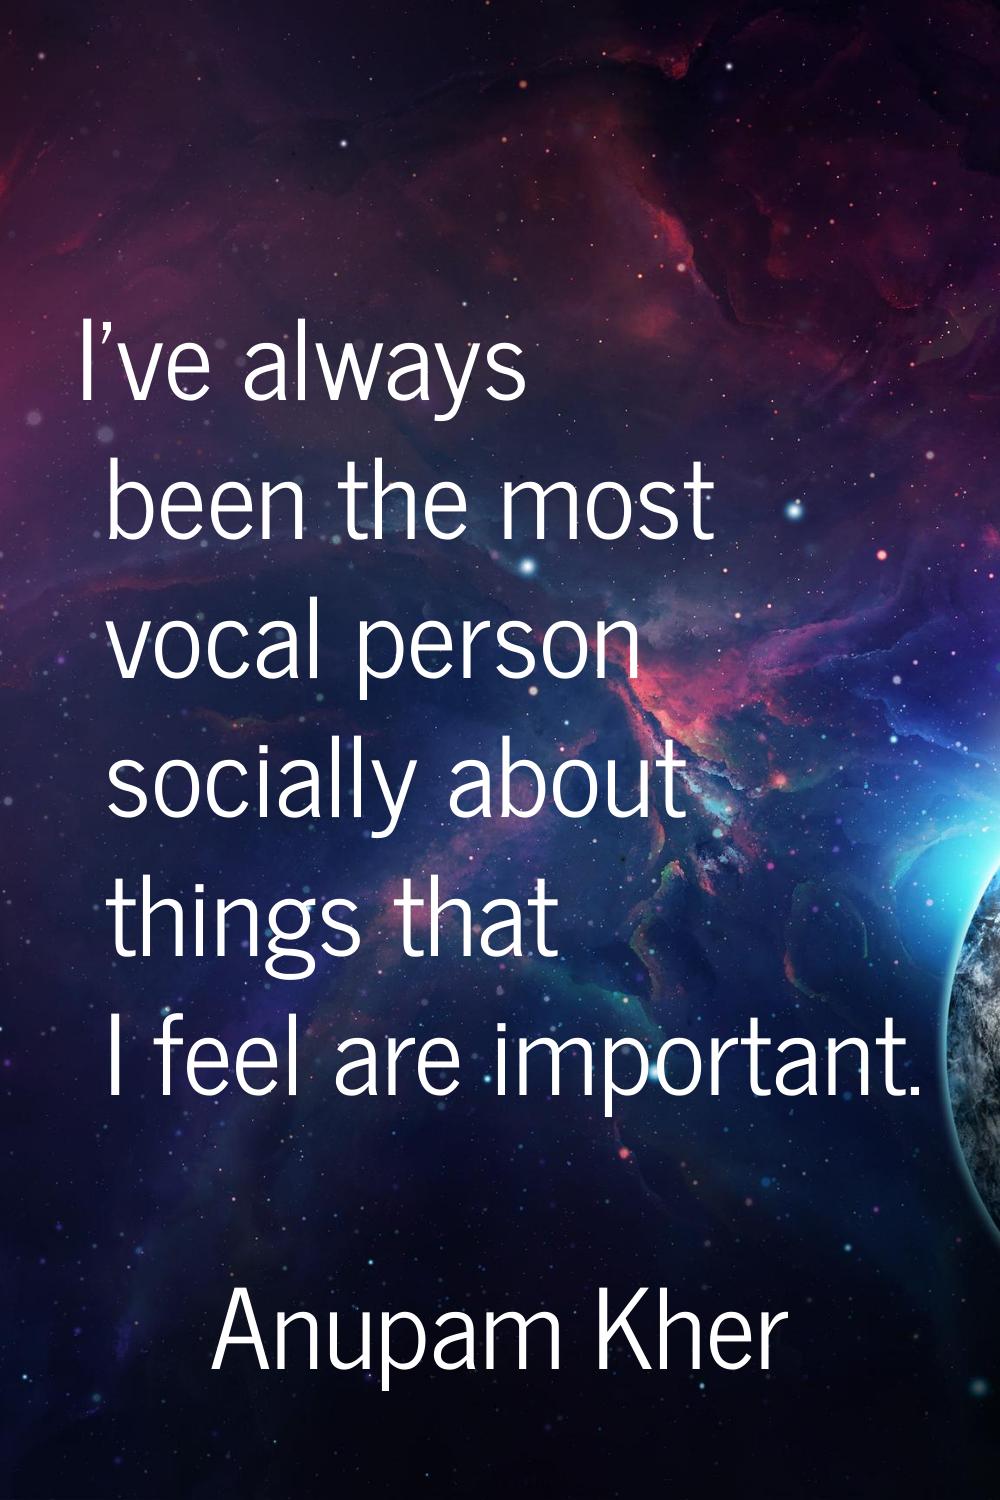 I've always been the most vocal person socially about things that I feel are important.